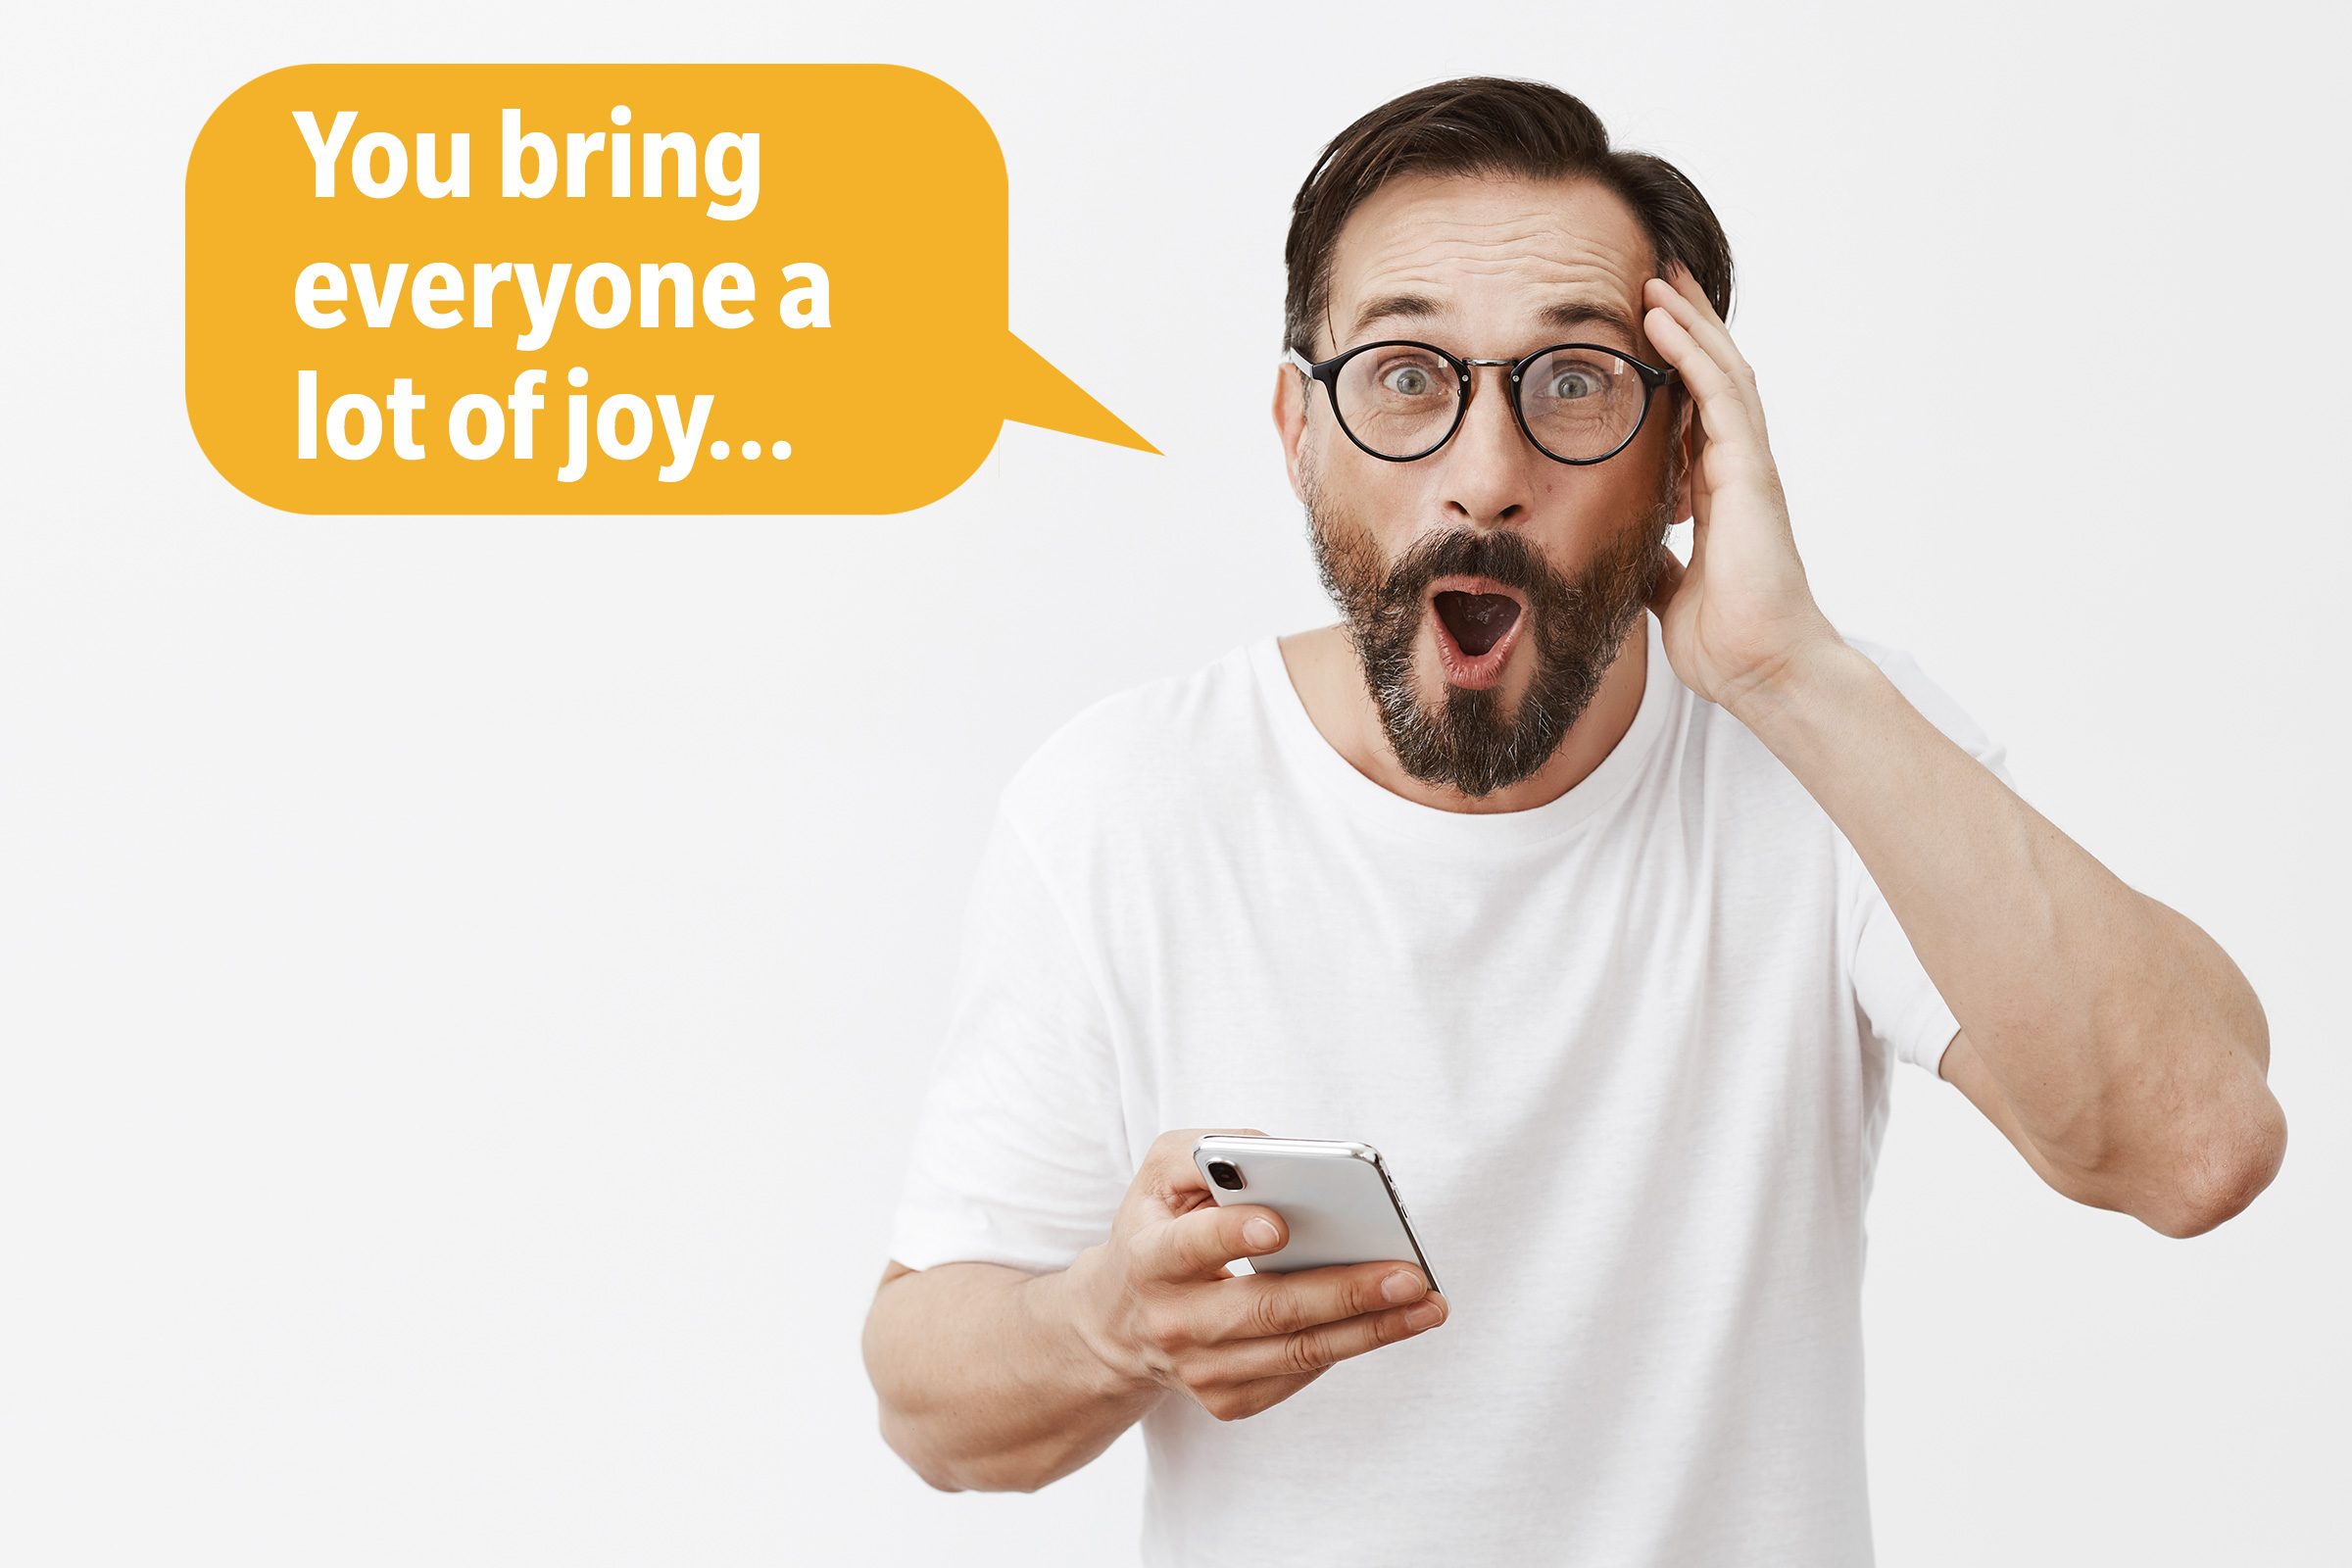 Surprised man delivering a comeback roast, speech bubble text: "You bring everyone a lot of joy..."